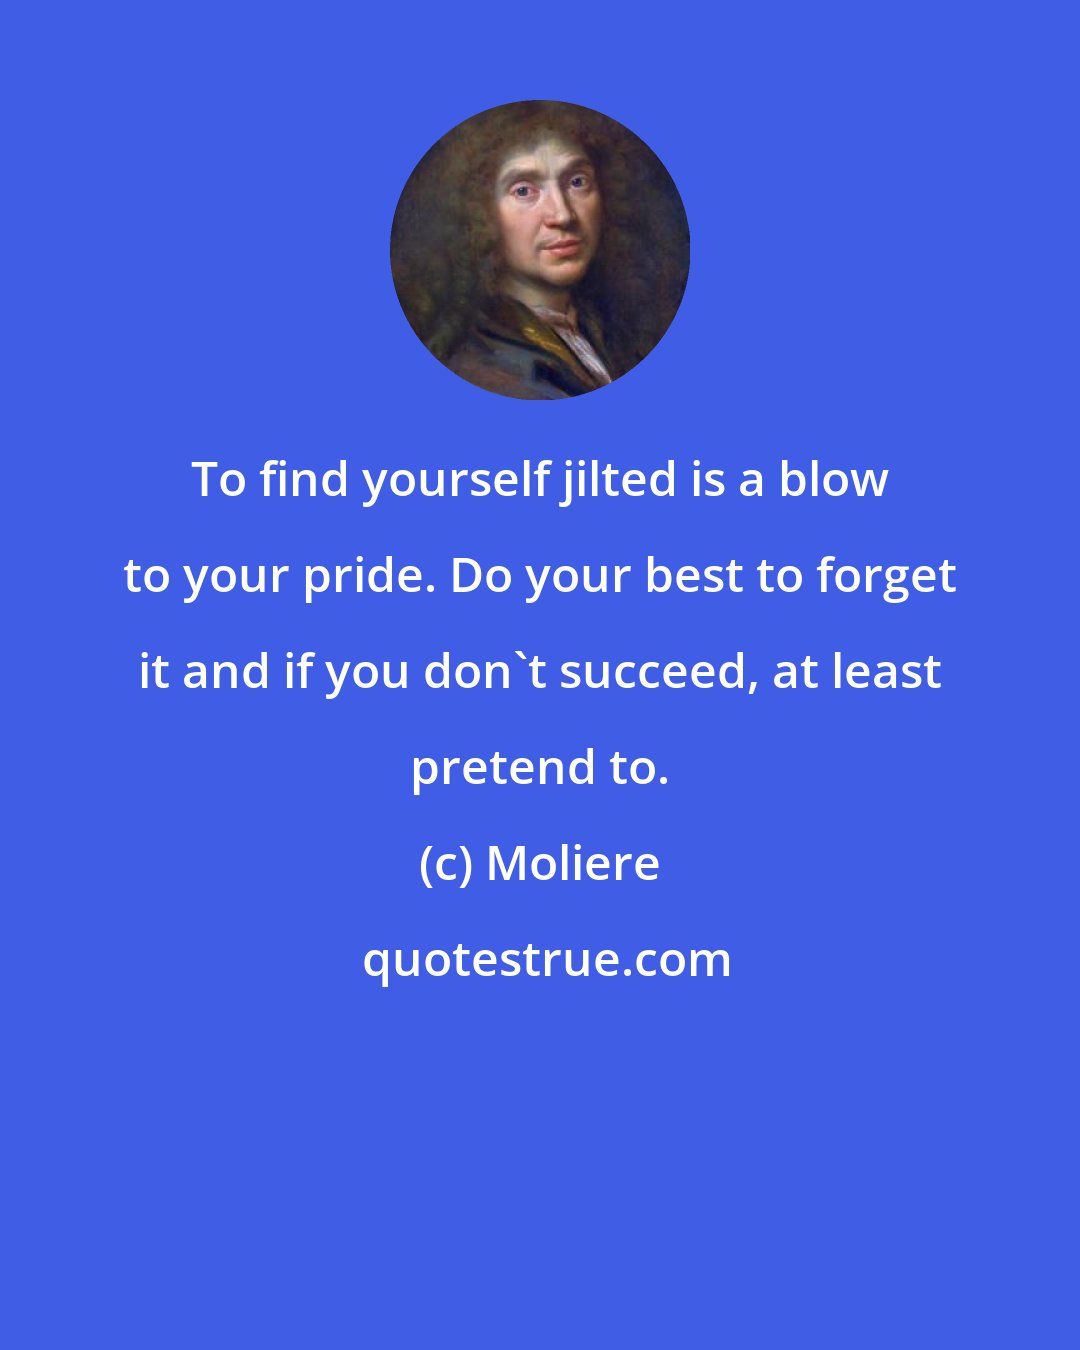 Moliere: To find yourself jilted is a blow to your pride. Do your best to forget it and if you don't succeed, at least pretend to.